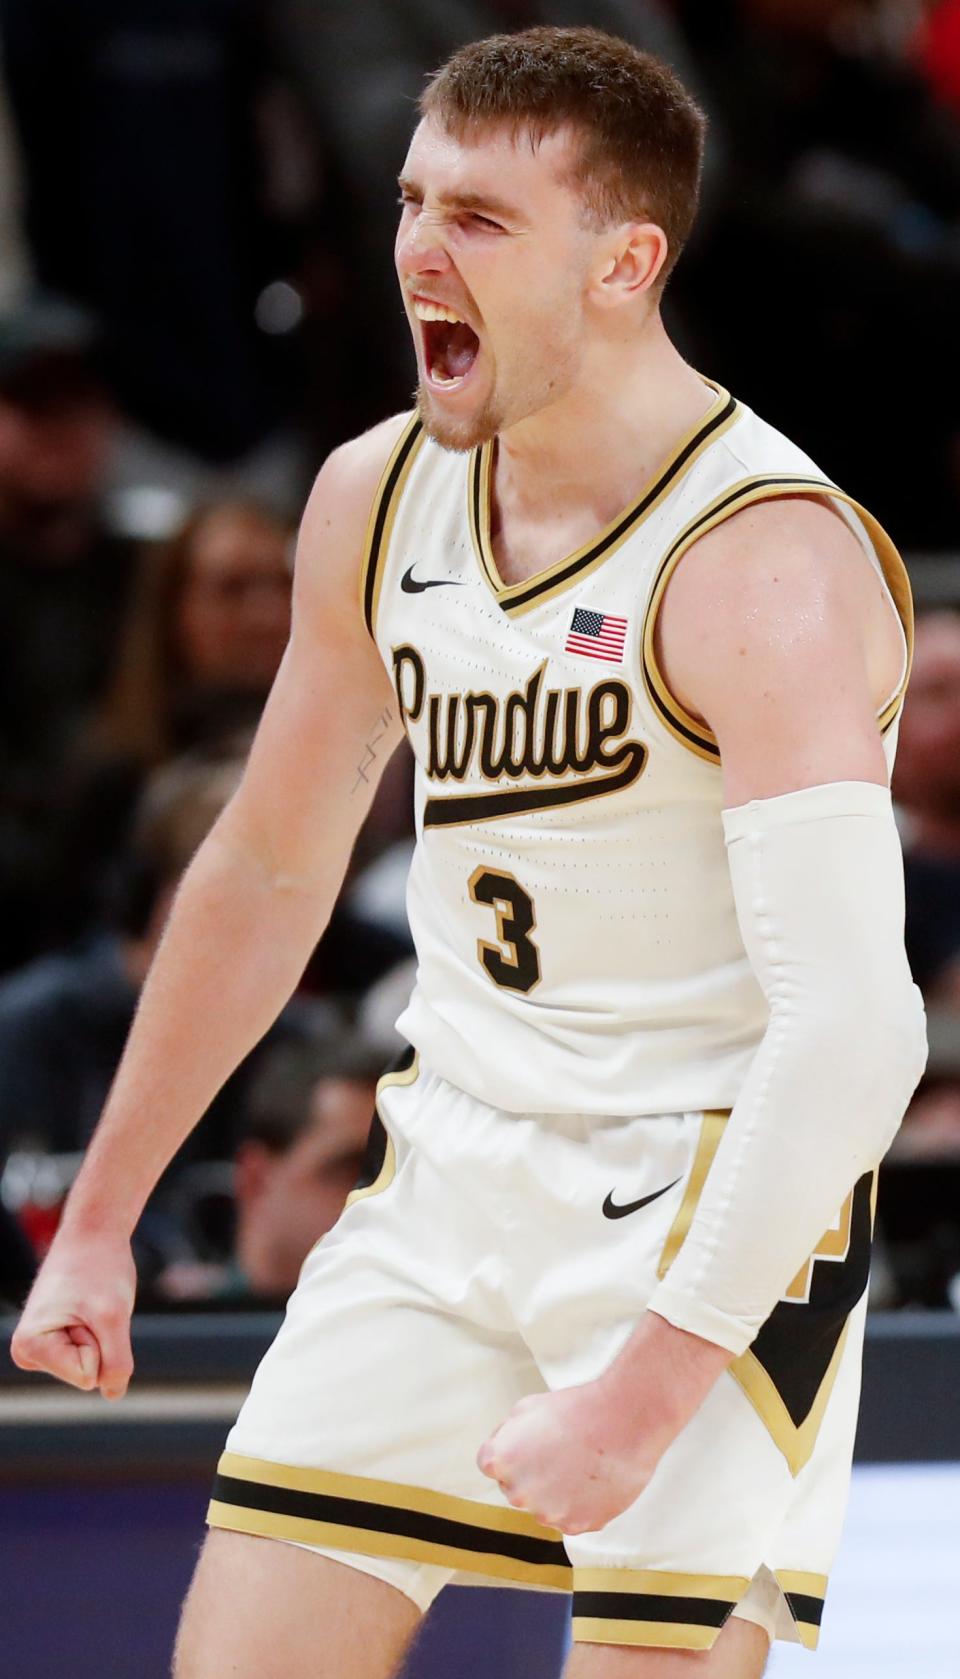 Purdue Boilermakers guard Braden Smith (3) celebrates after scoring during the NCAA men’s basketball game against the Arizona Wildcats, Saturday, Dec. 16, 2023, at Gainbridge Fieldhouse in Indianapolis. Purdue Boilermakers won 92-84.